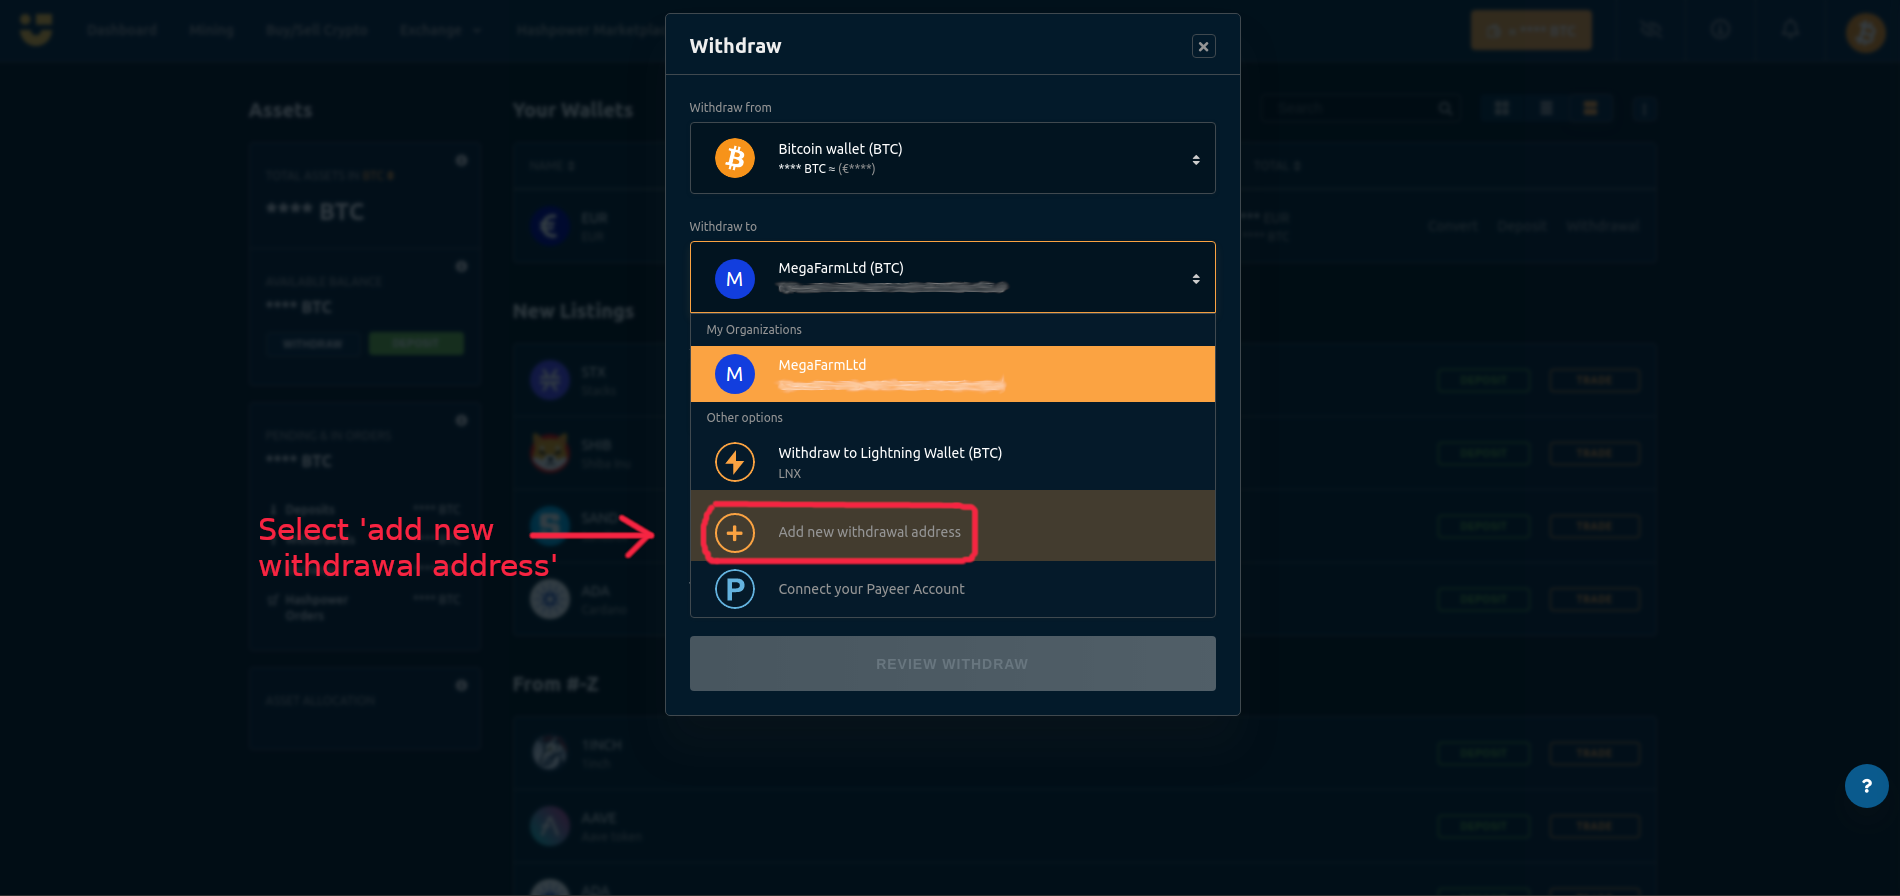 Full Steps On How To Link Core Withdrawal Address » RealWinner Tips 